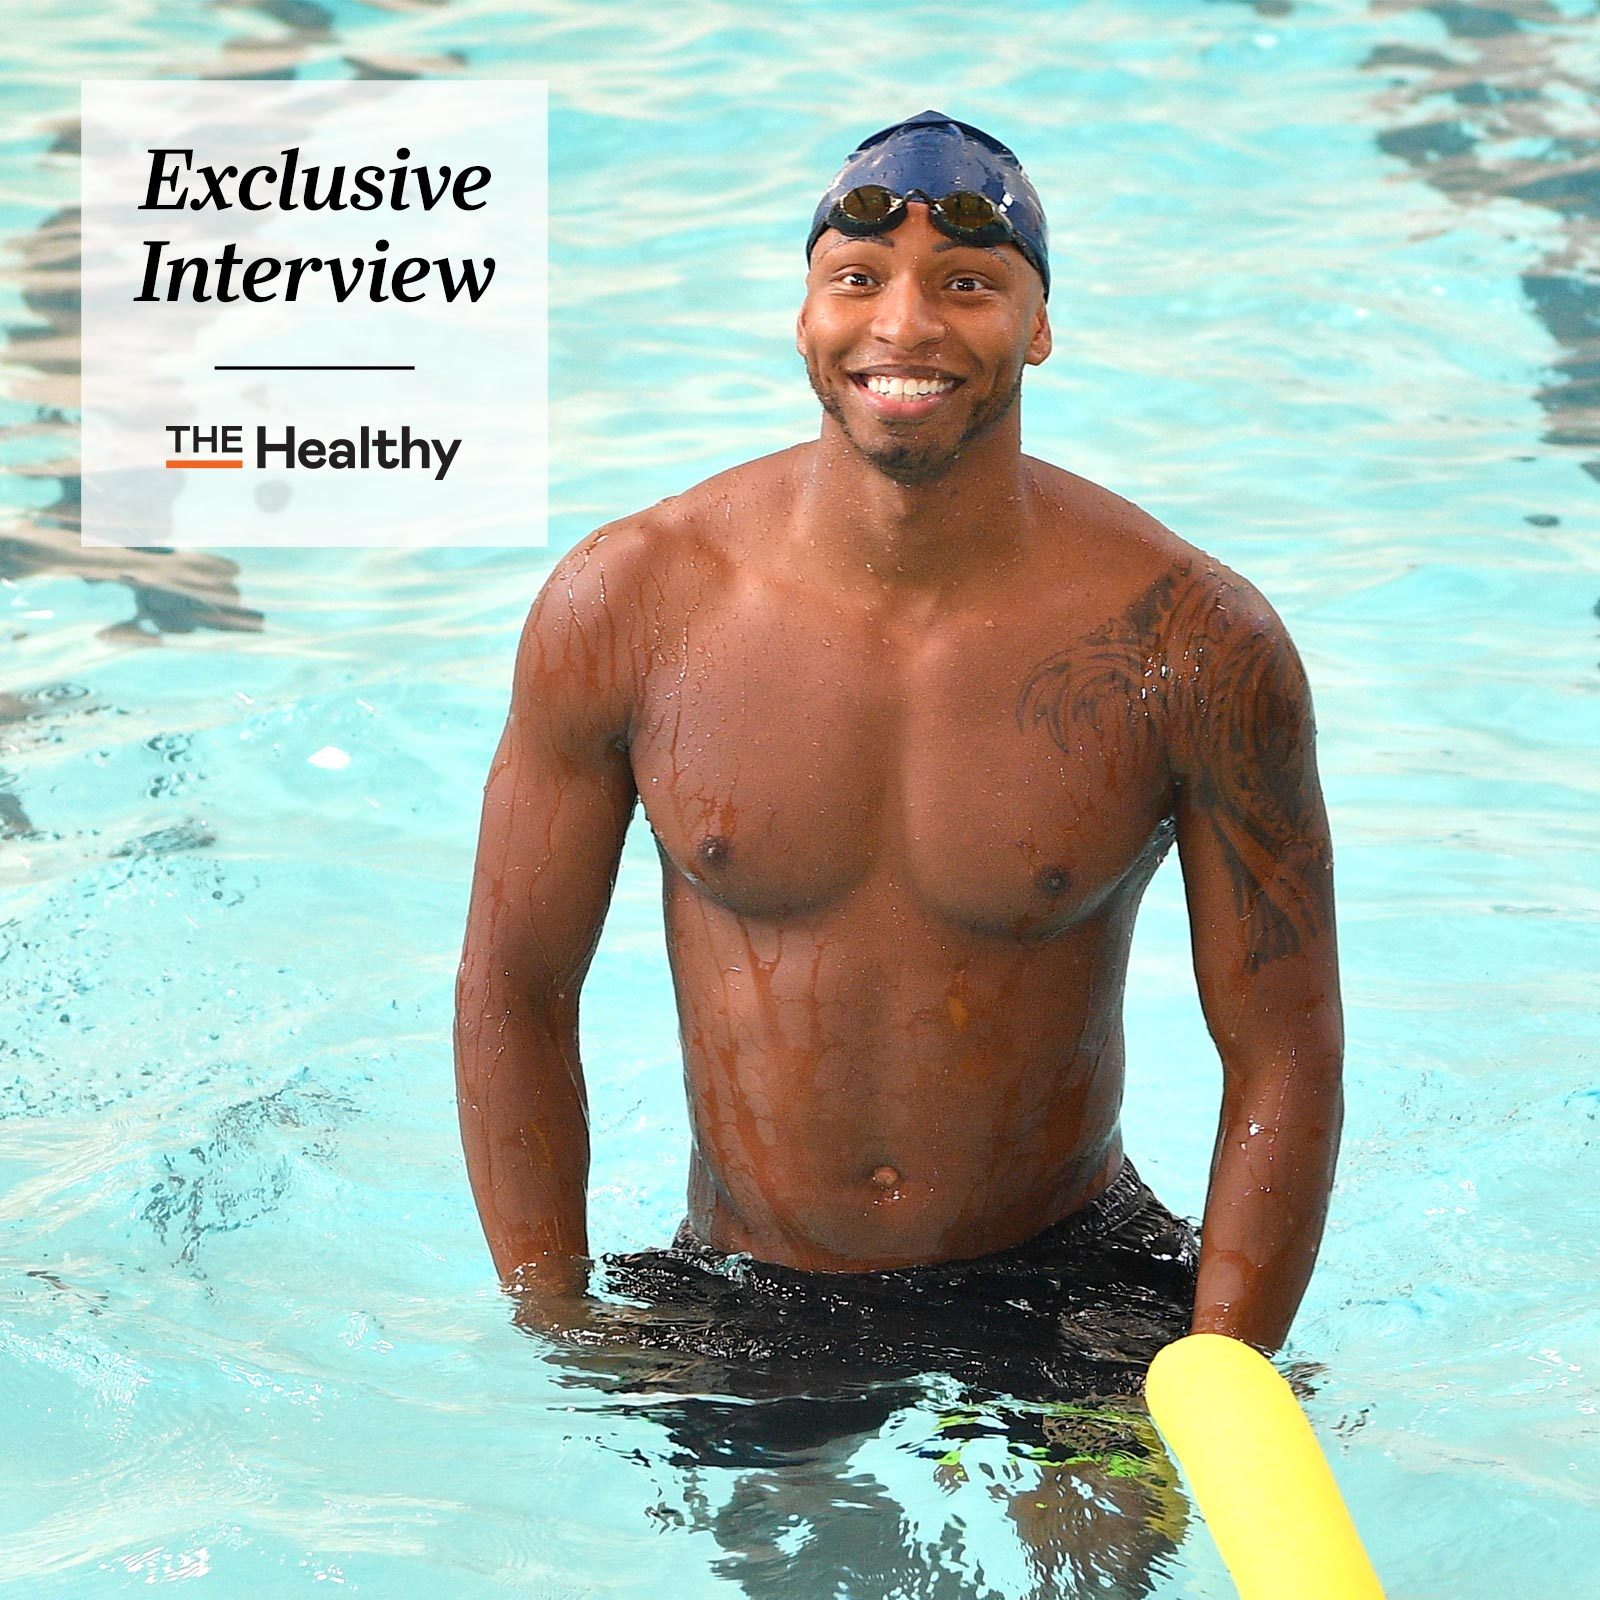 Cullen Jones, Olympic Swimmer, in a pool with The Healthy Exclusive interview logo in upper left corner